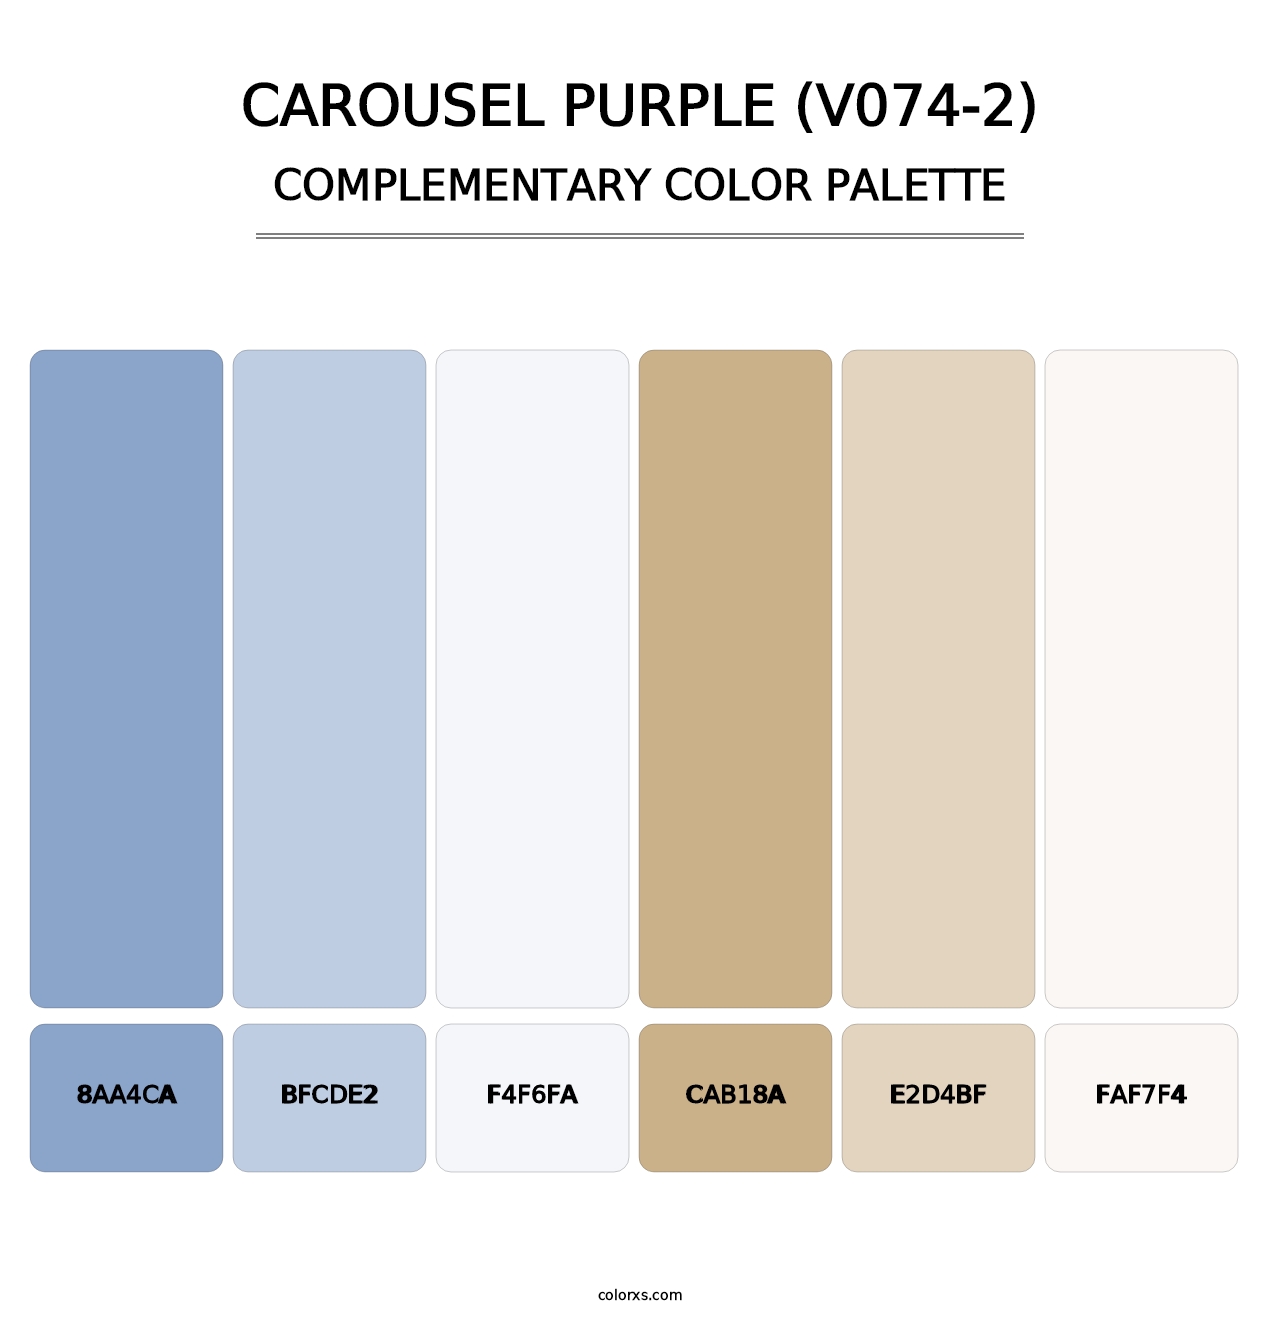 Carousel Purple (V074-2) - Complementary Color Palette